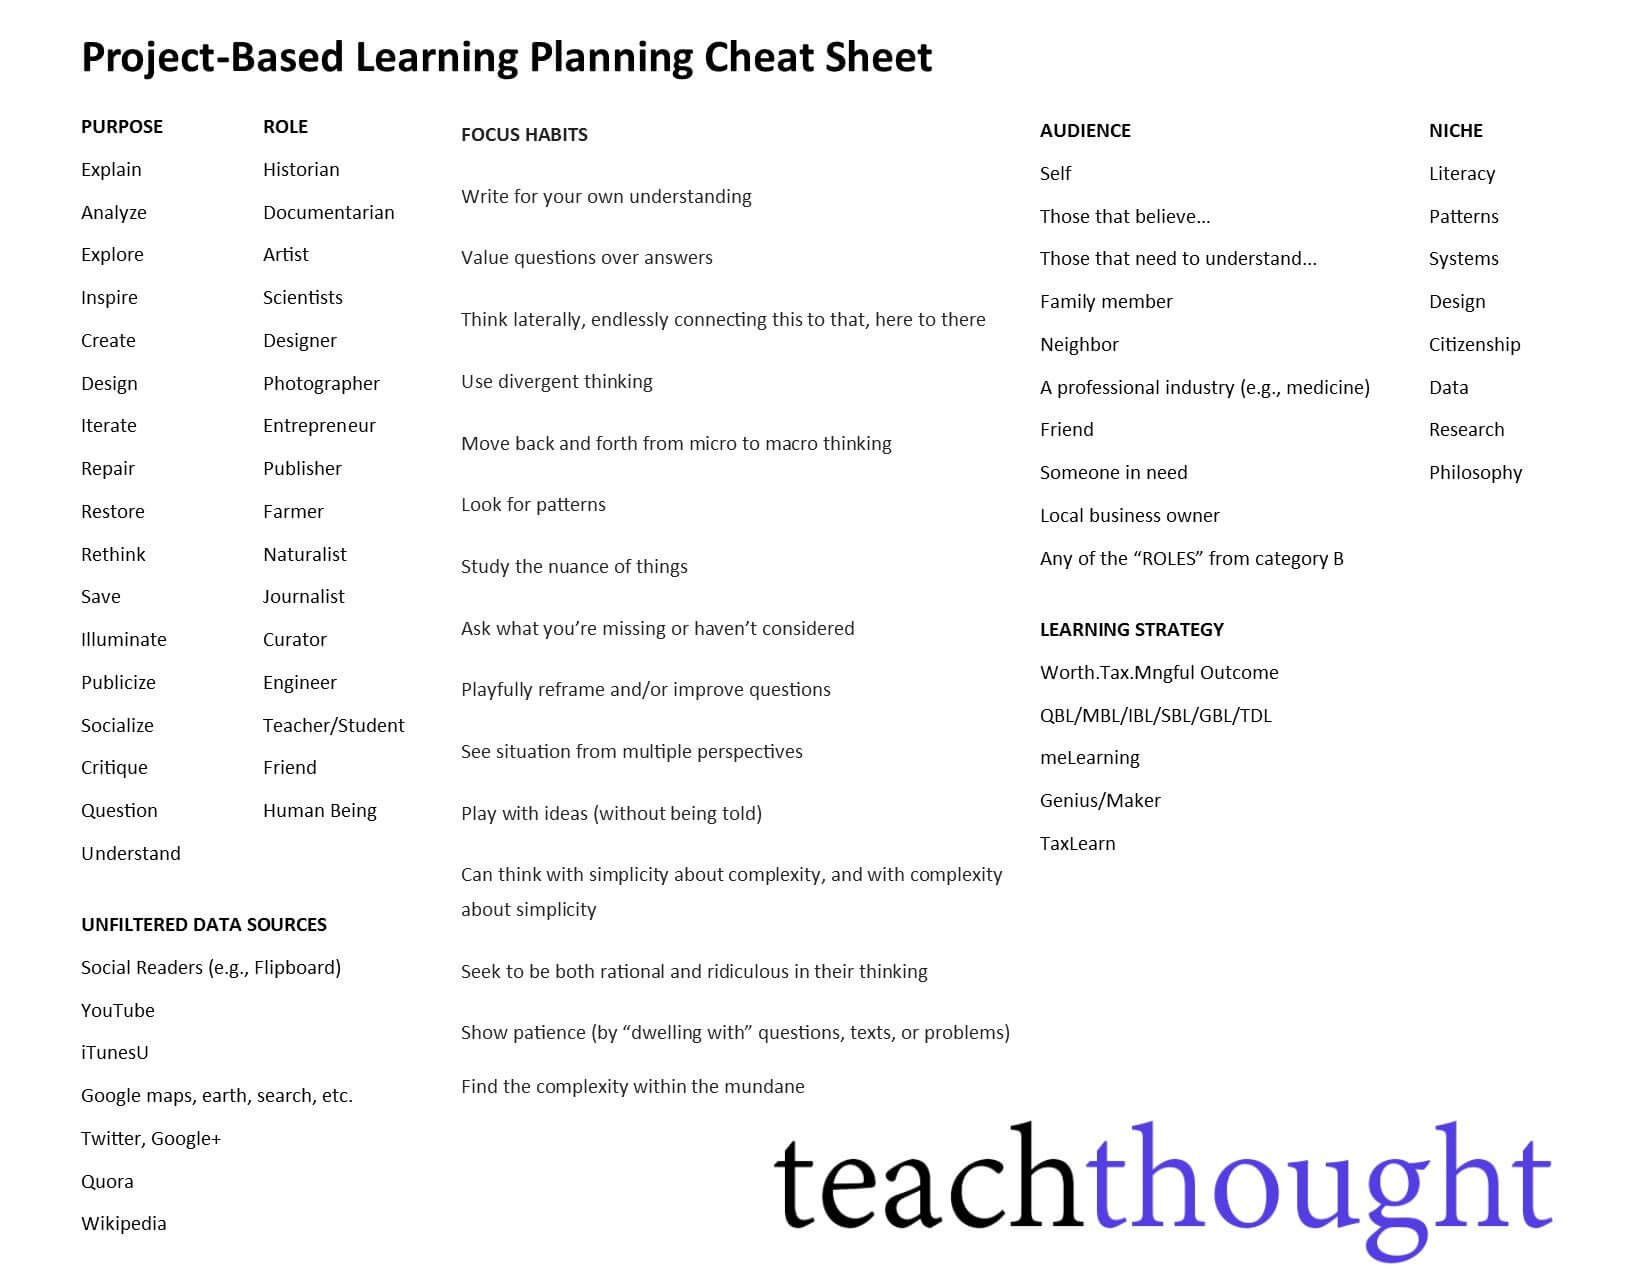 a project-based learning cheat sheet